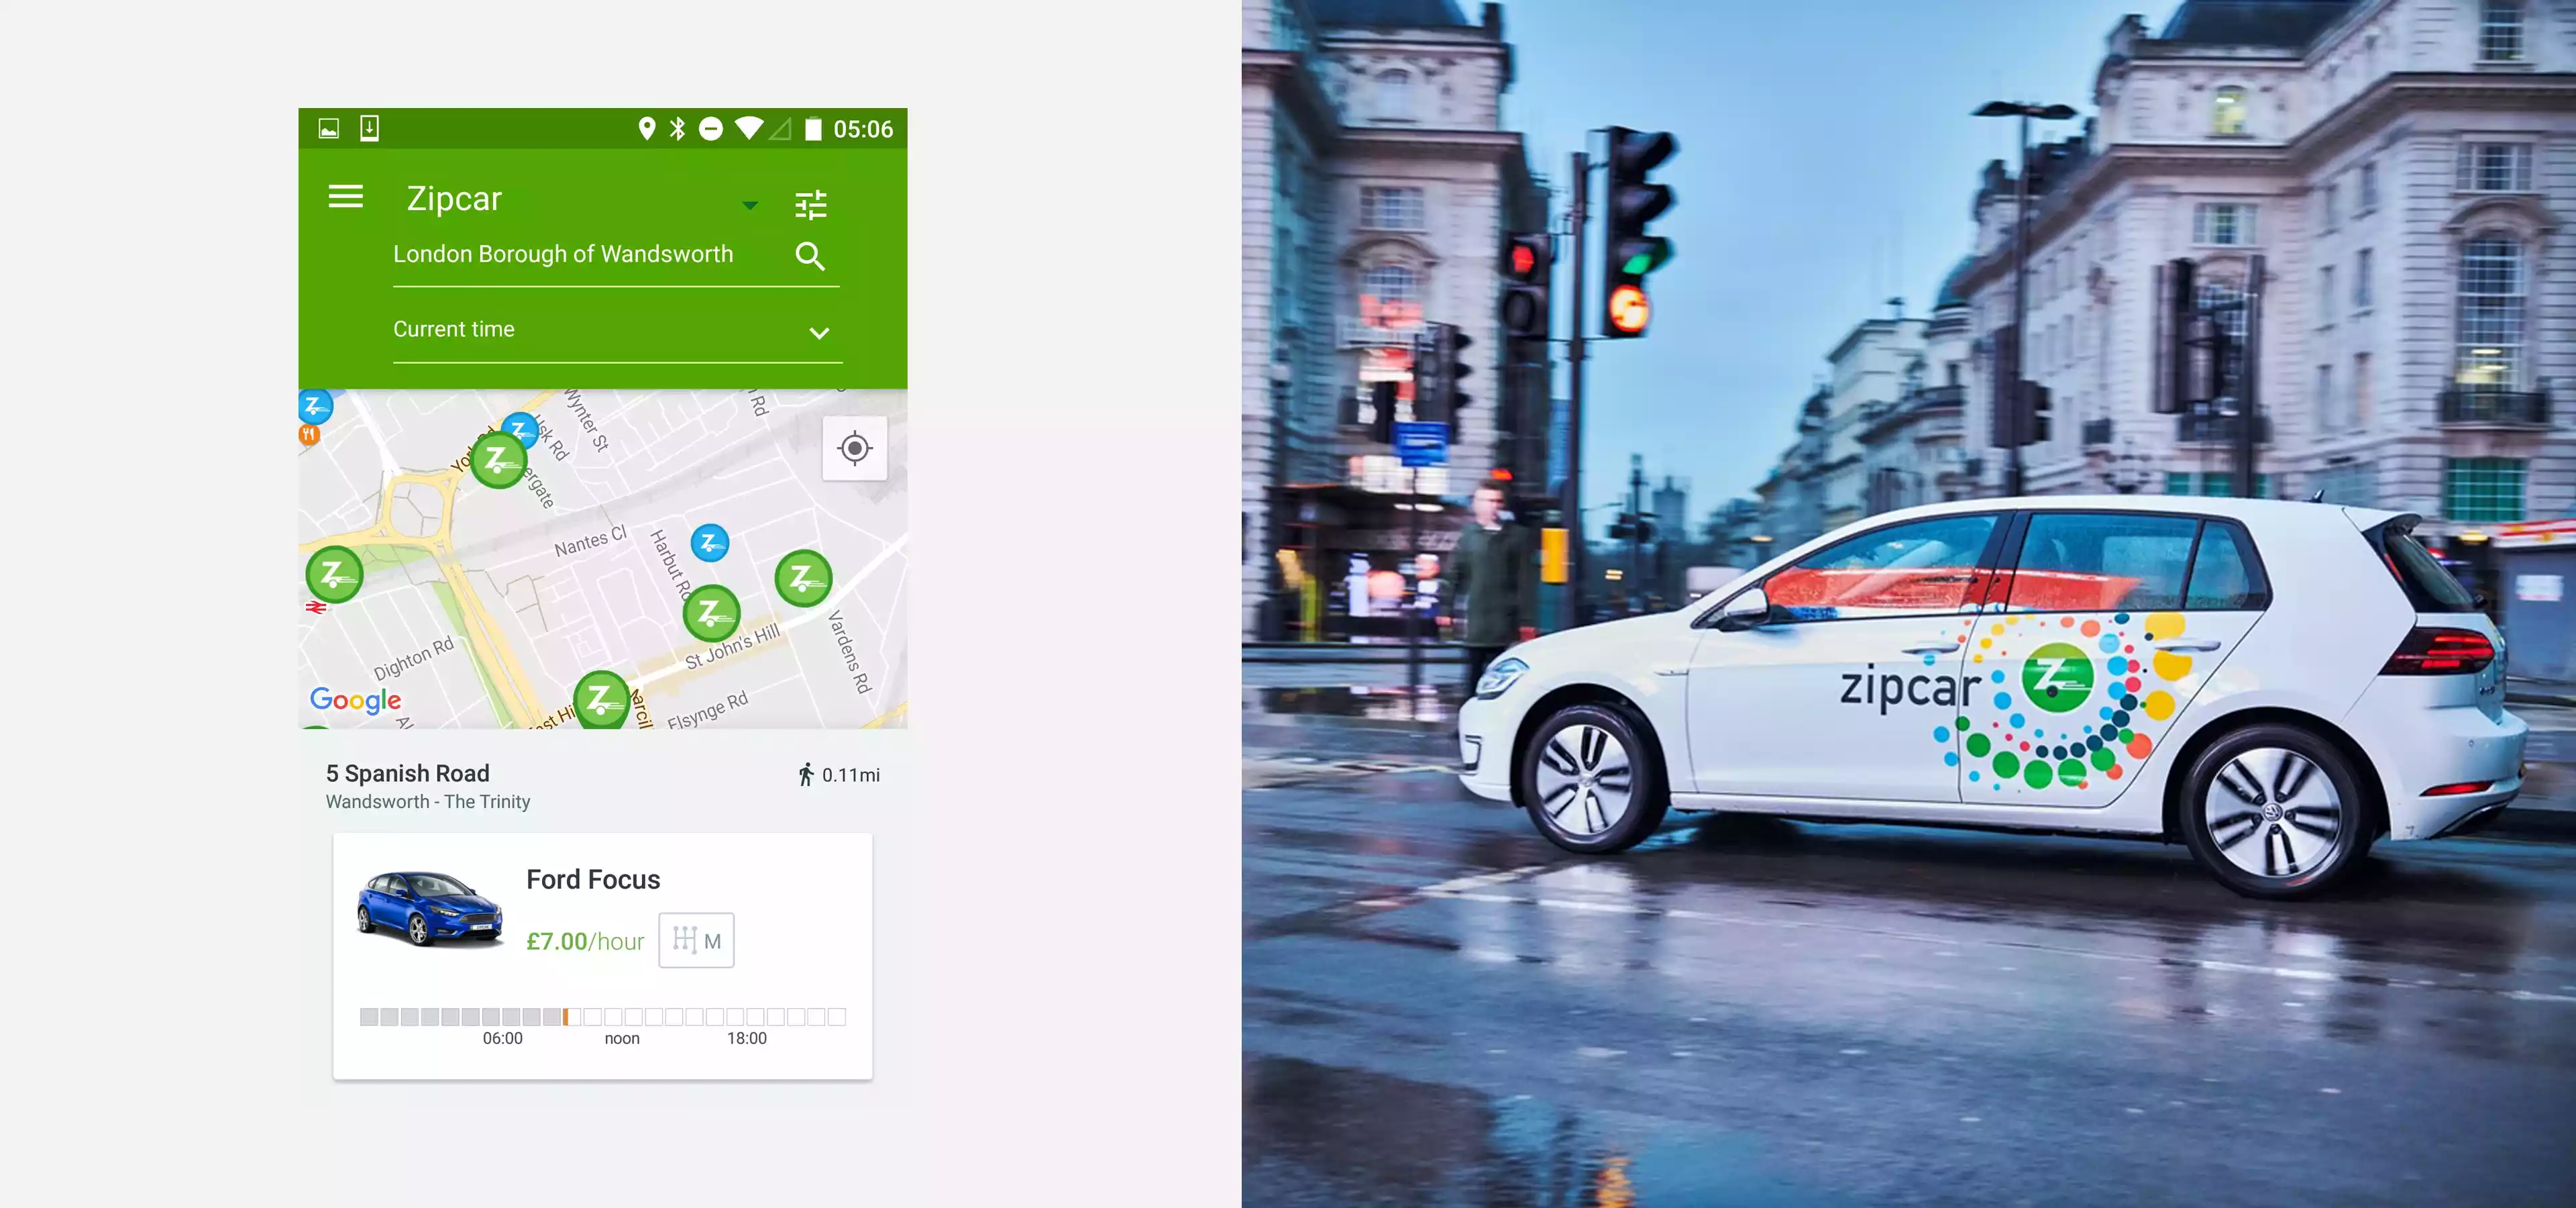 zipcar example to explain the concept of PaaS